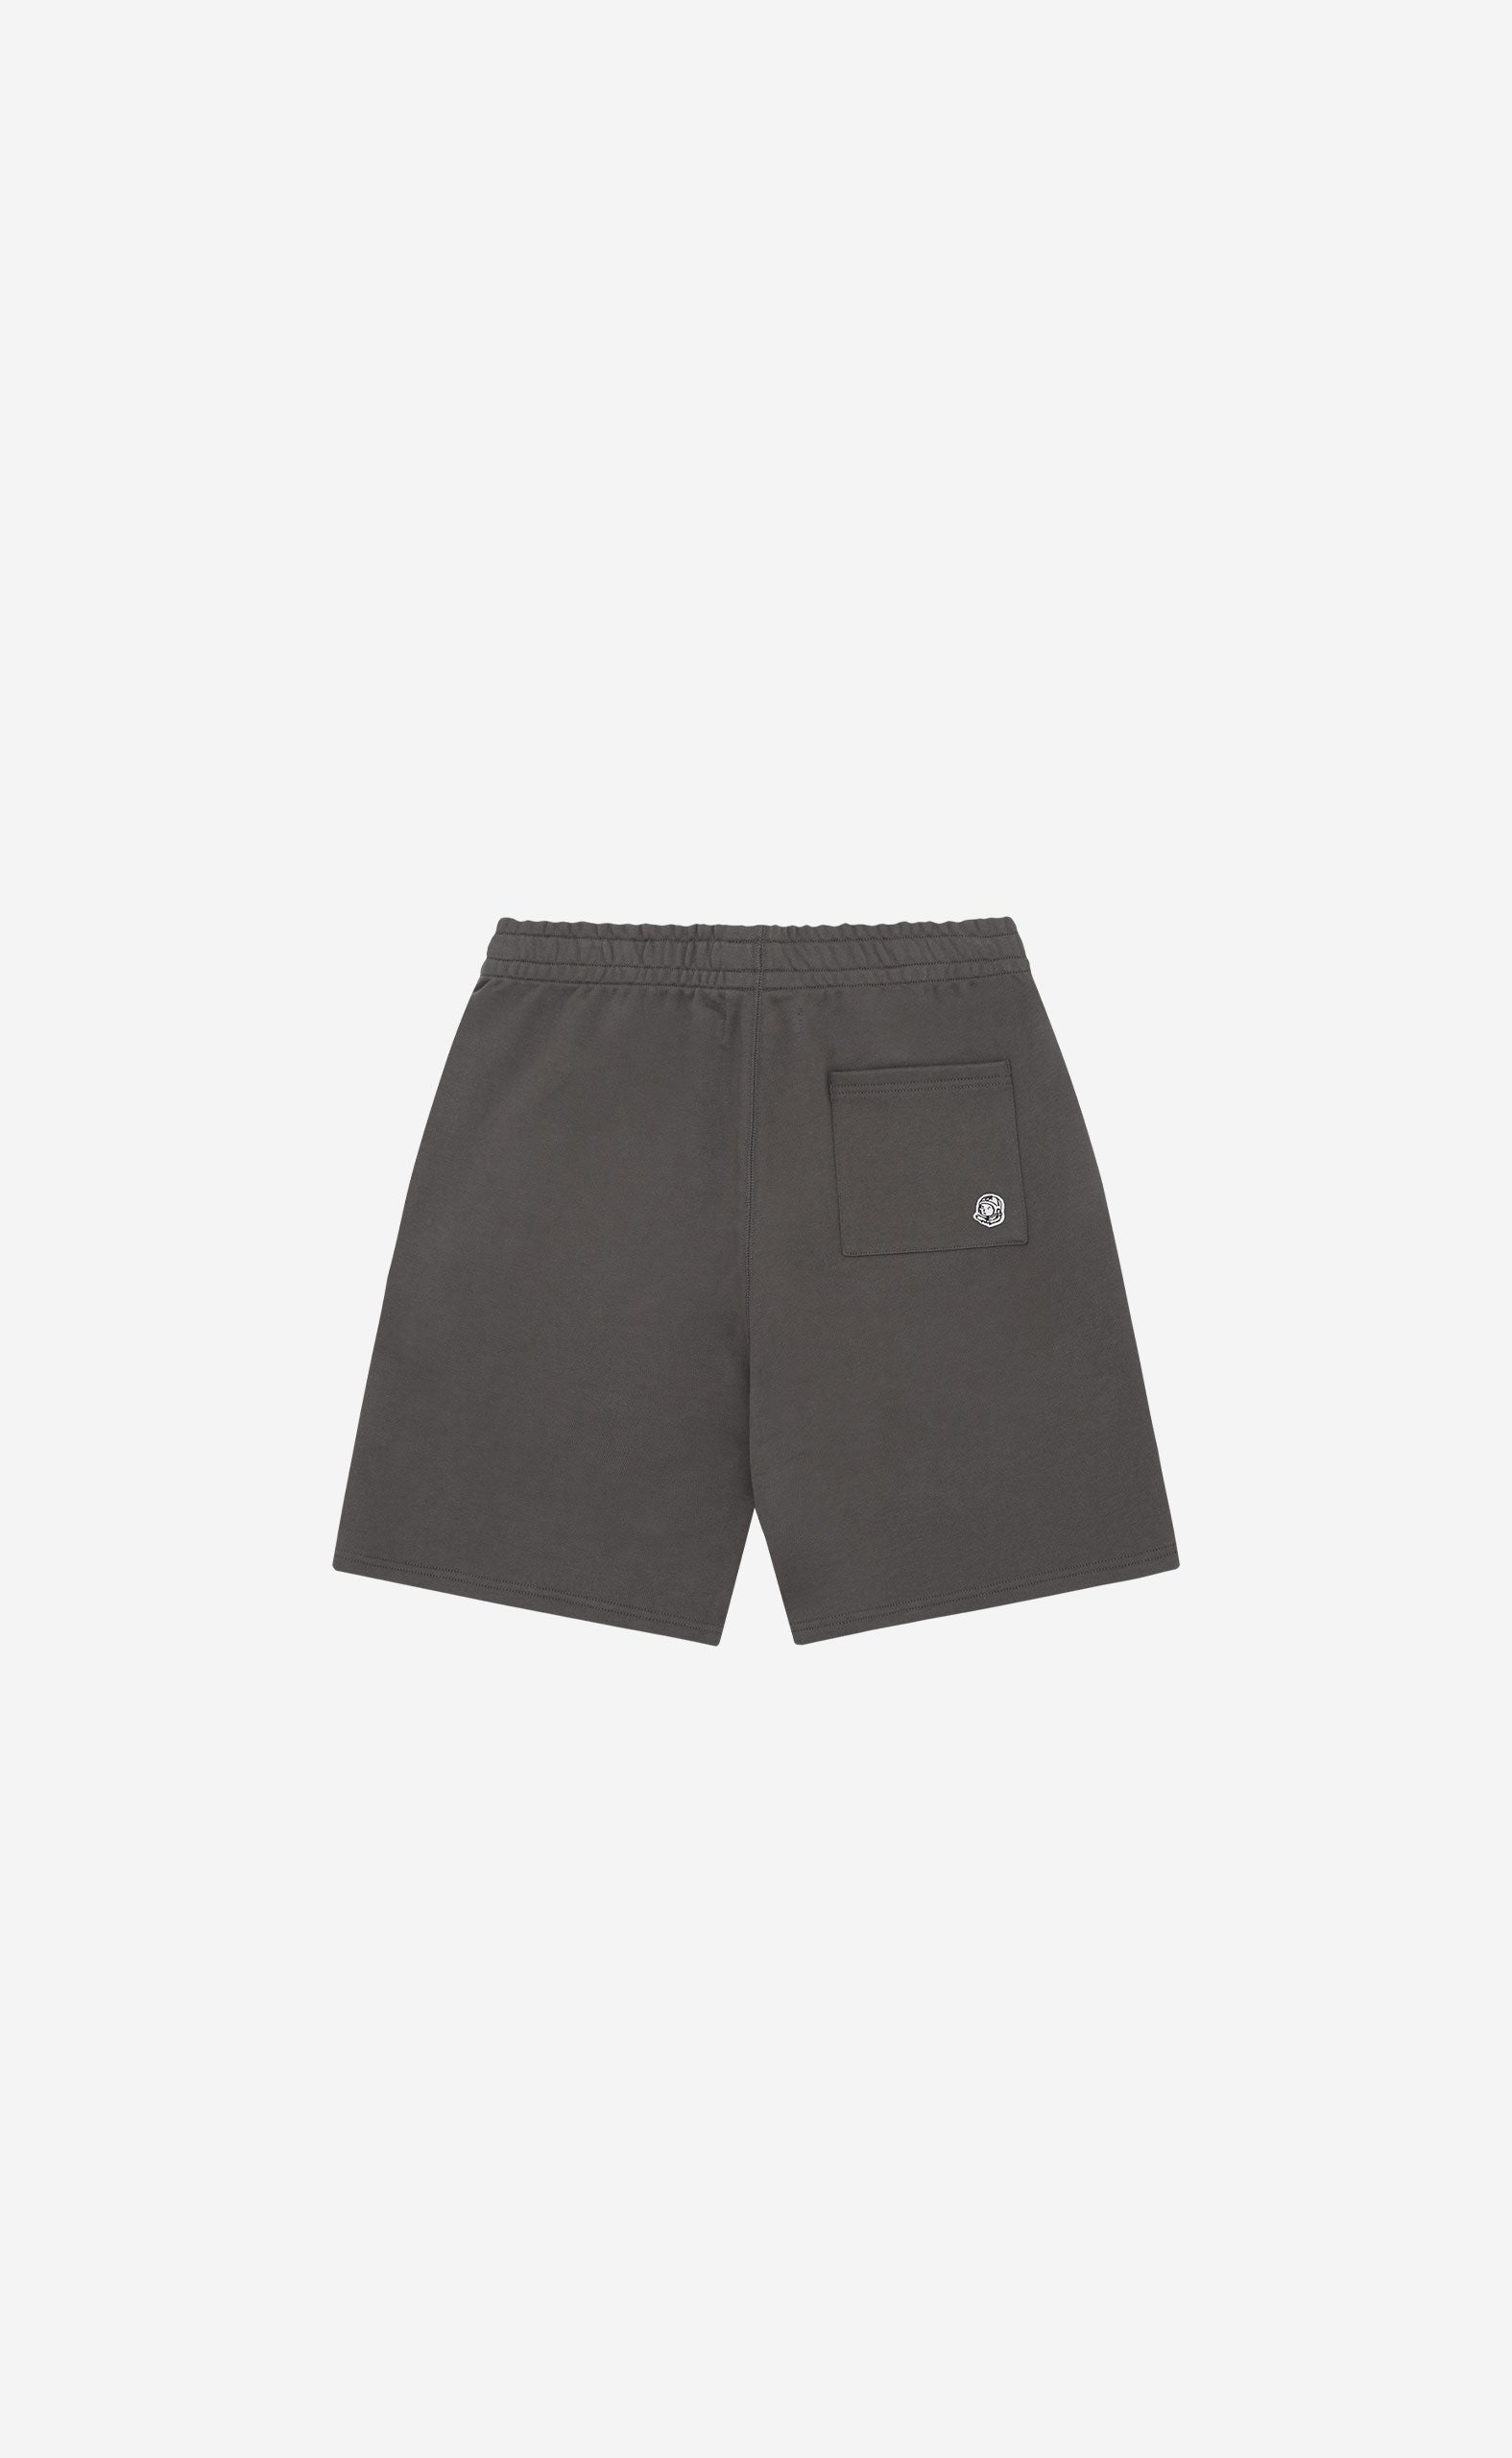 SPACE GREY SMALL ARCH LOGO SHORTS